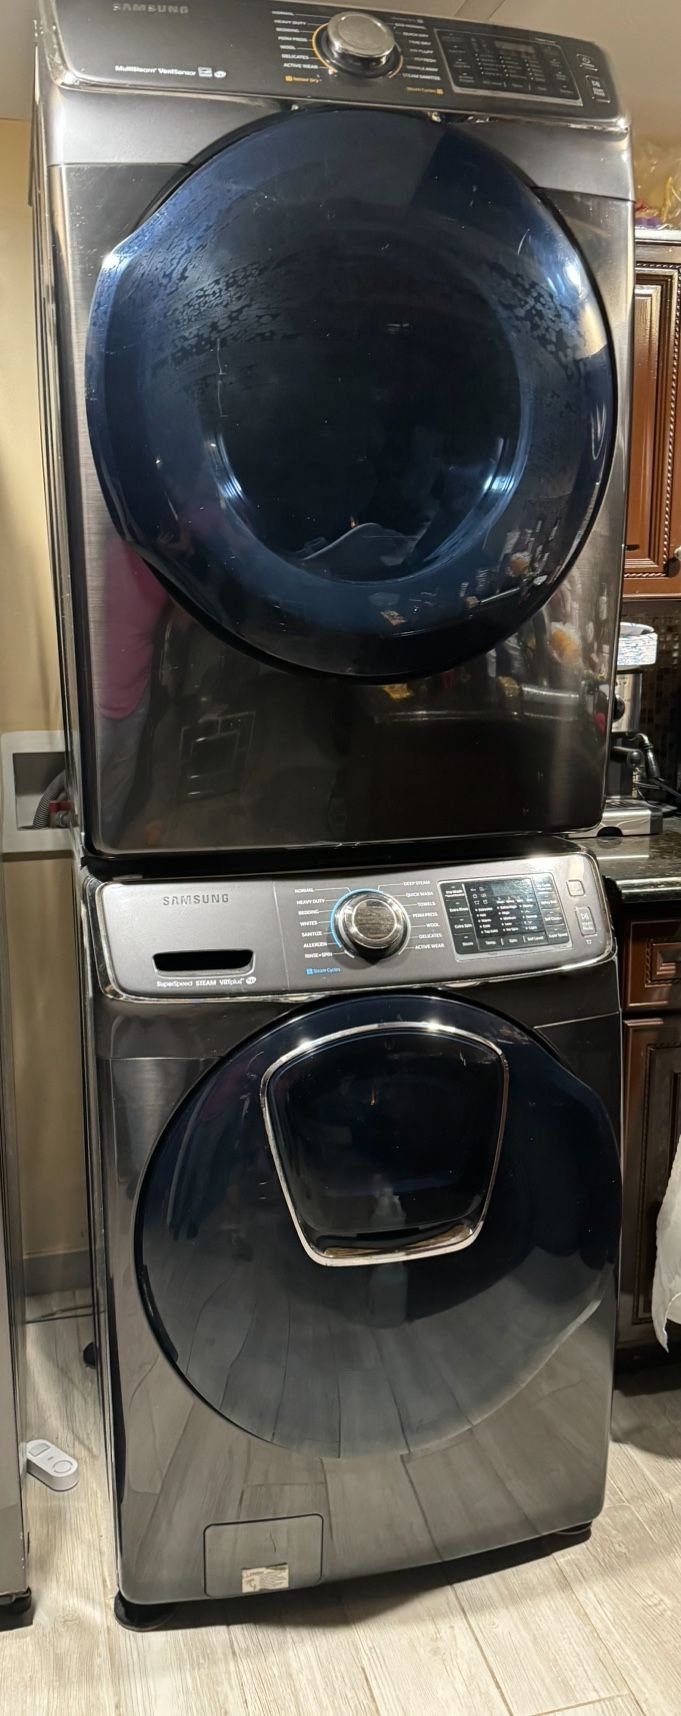 Washer And Dryer - $500